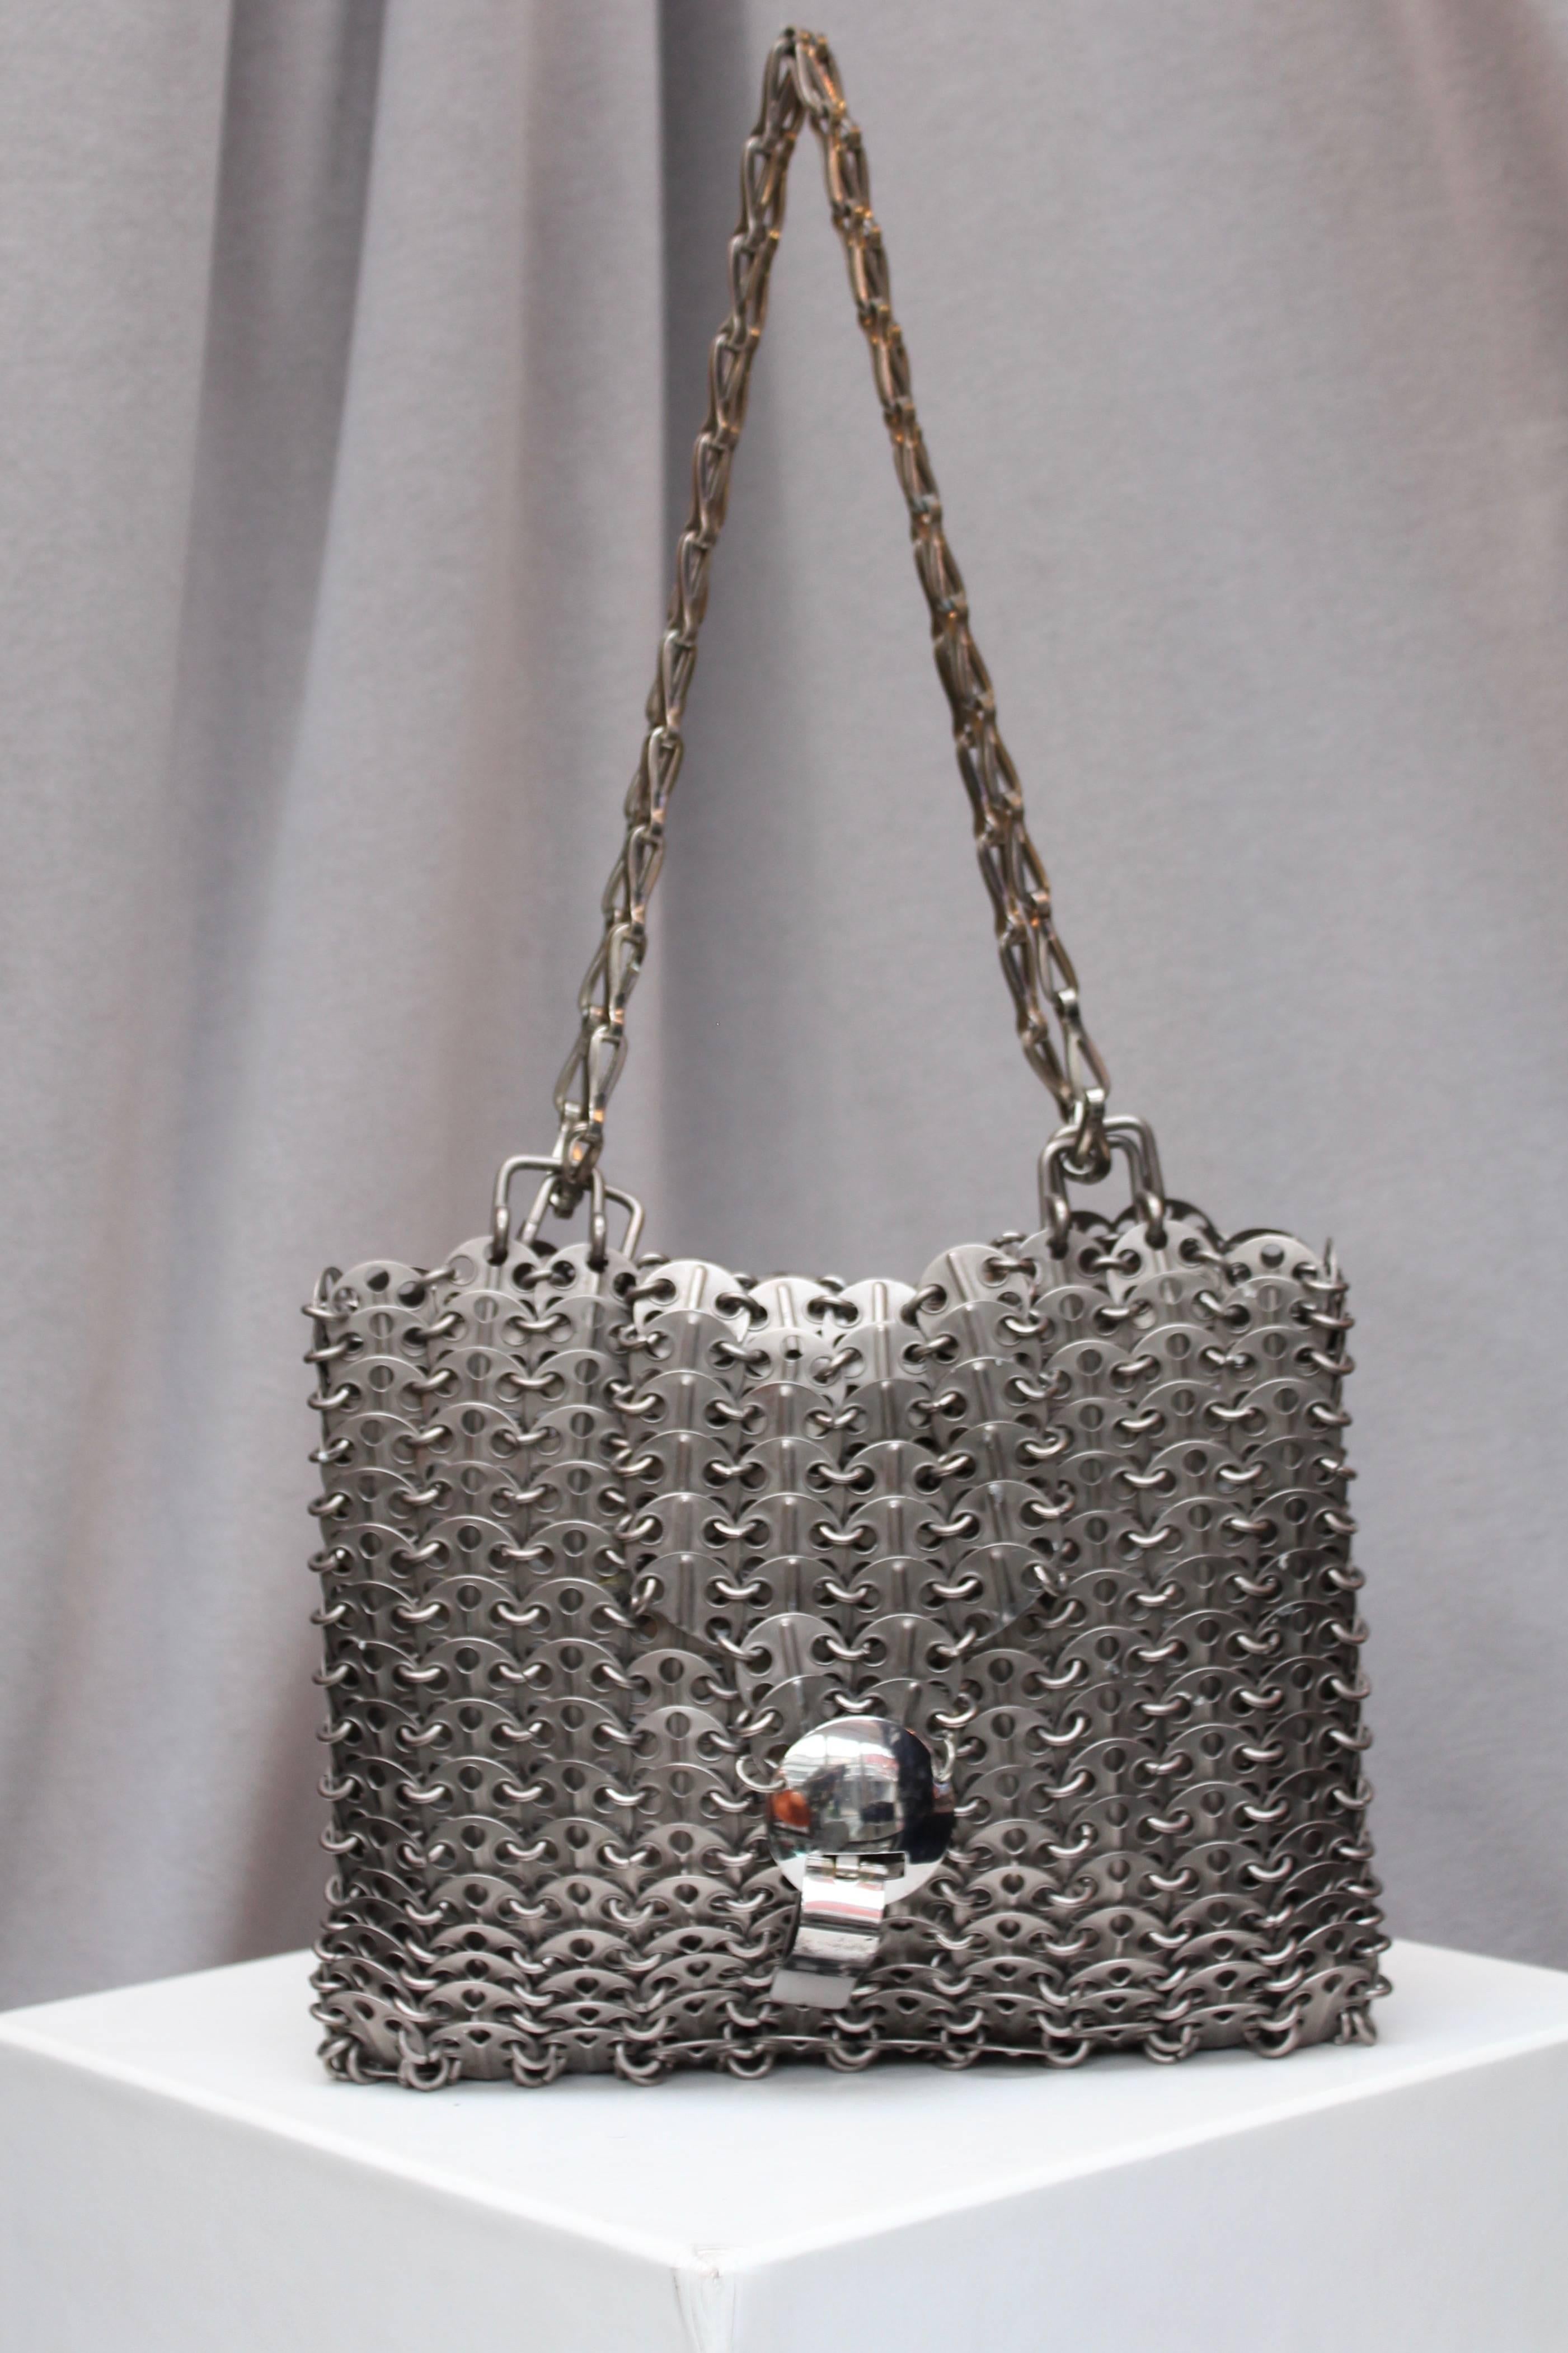 PACO RABANNE (Made in France) Iconic “69” bag comprised of silver-tone perforated chips, typical of the fashion house work in the 1960-1970’s. This piece features a flap and is decorated with a cylindrical closure issued in limited numbers at the